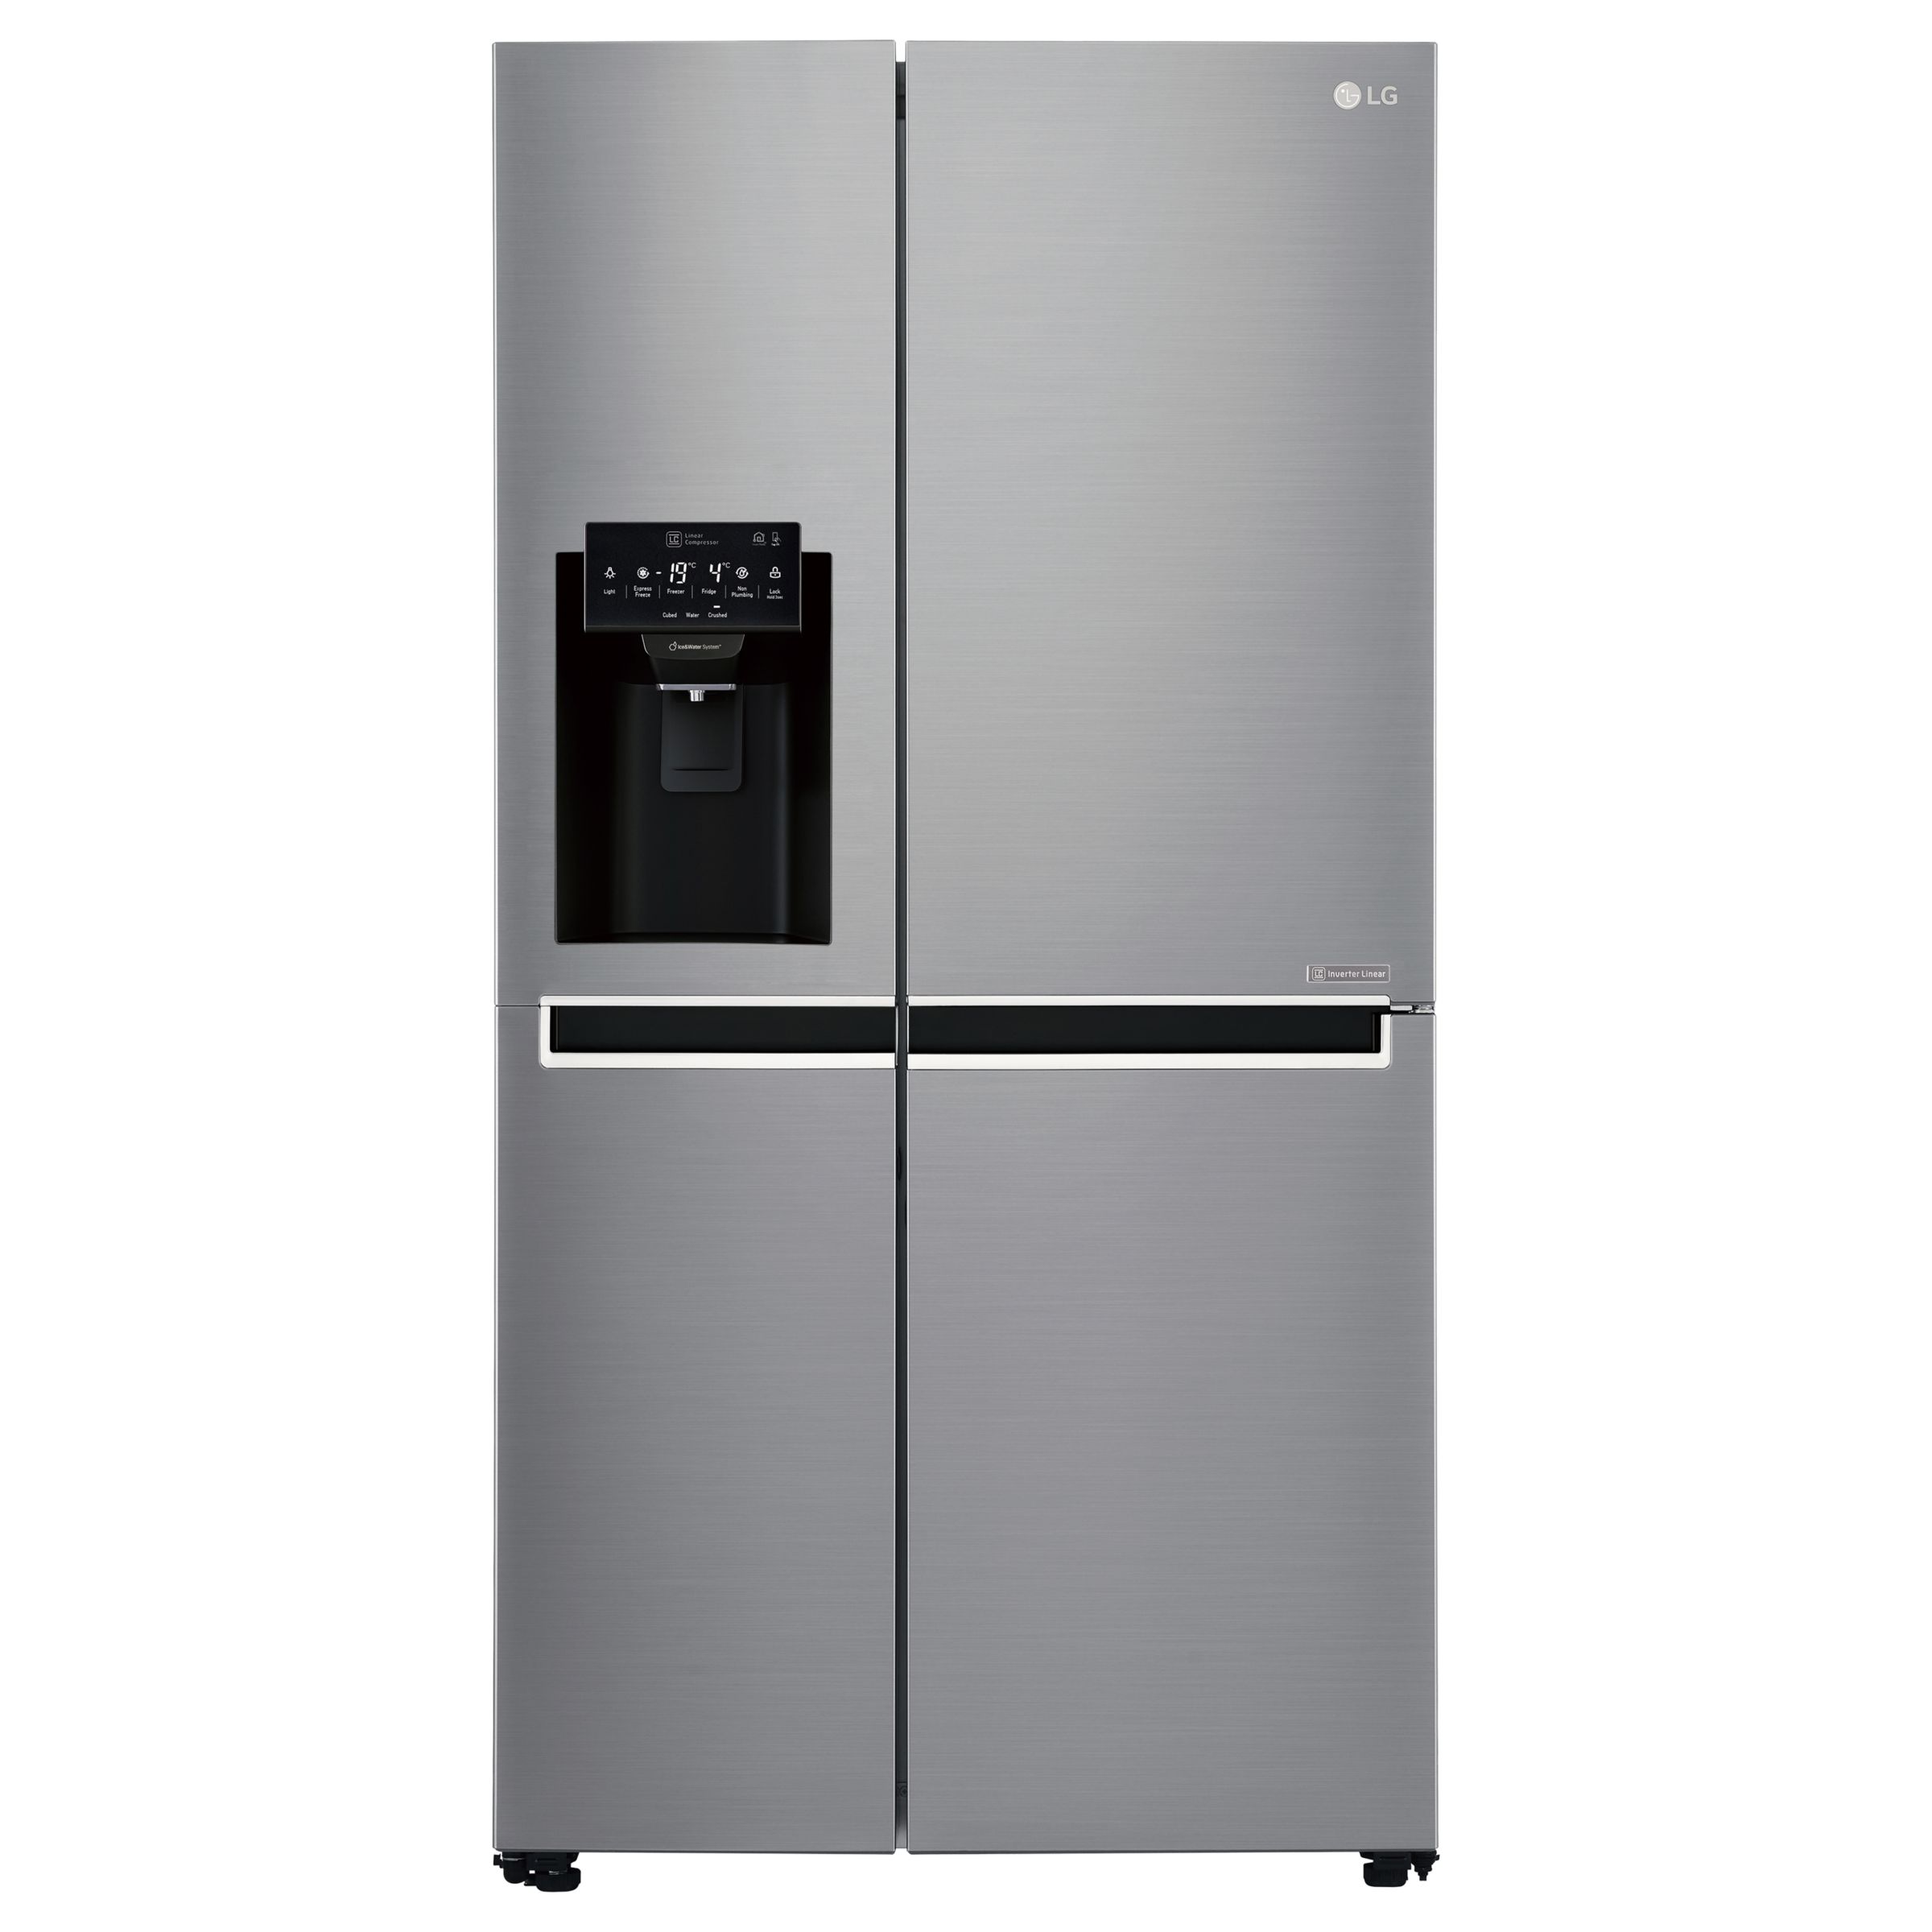 LG GSL761PZUV American Style Non-Plumbed Freestanding Fridge Freezer, A+ Energy Rating, 91cm Wide, Silver